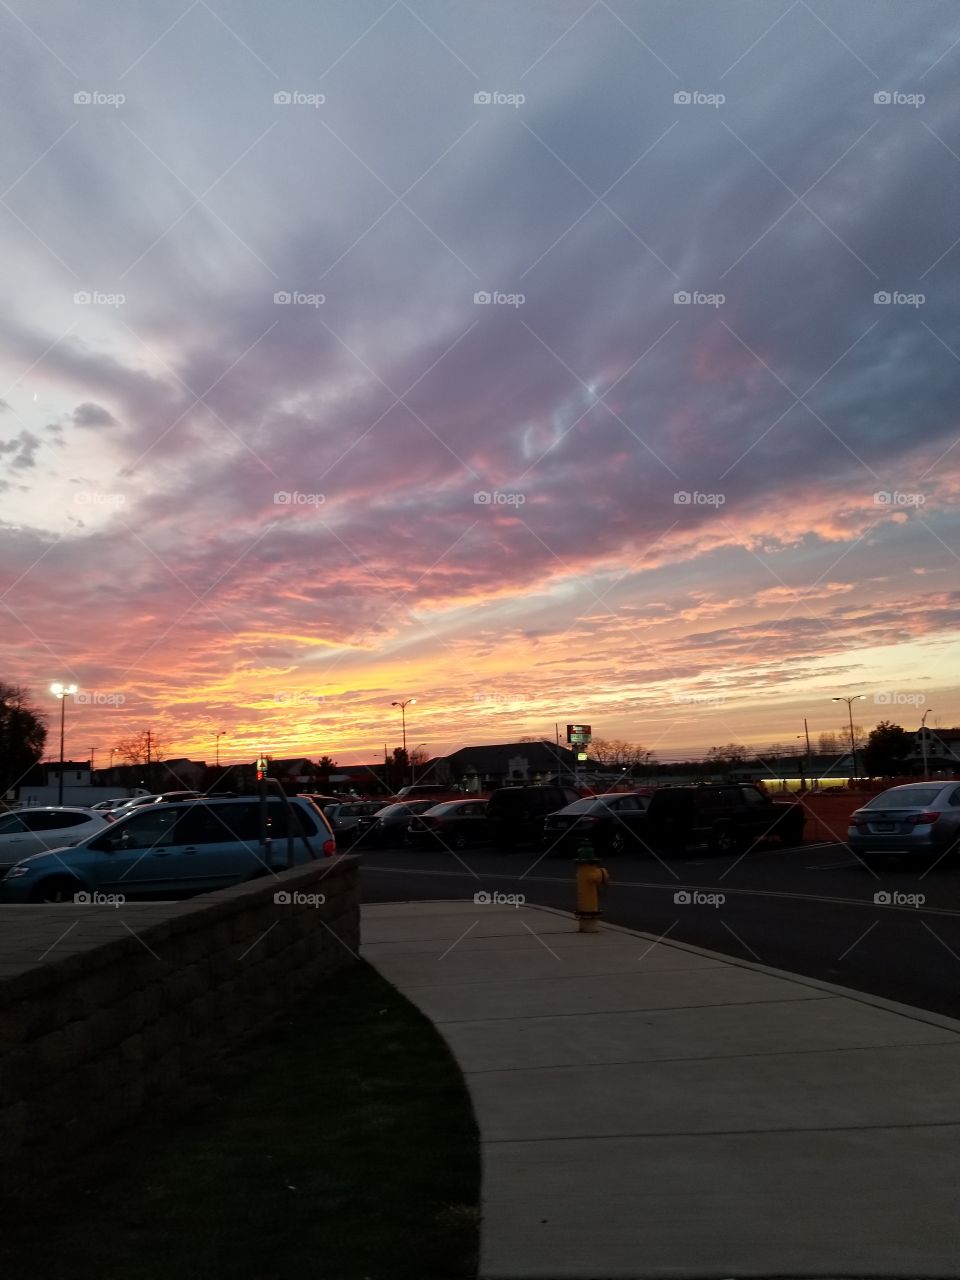 A bright, vibrant sunset over a thrift store parking lot.